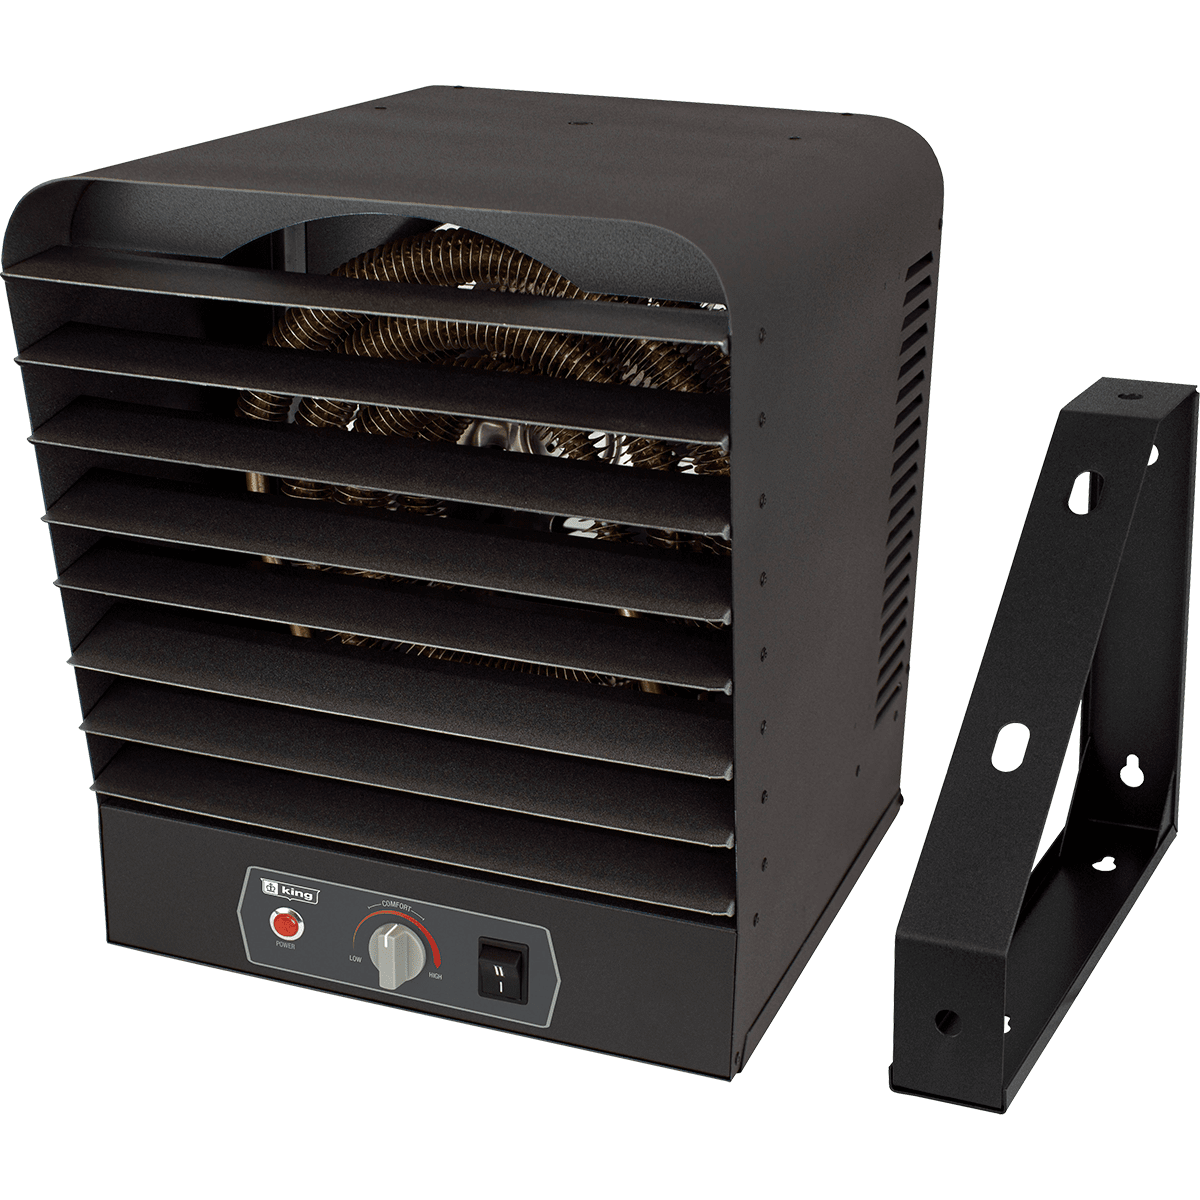 King Electric 240V Compact Garage Heater - 5,000W